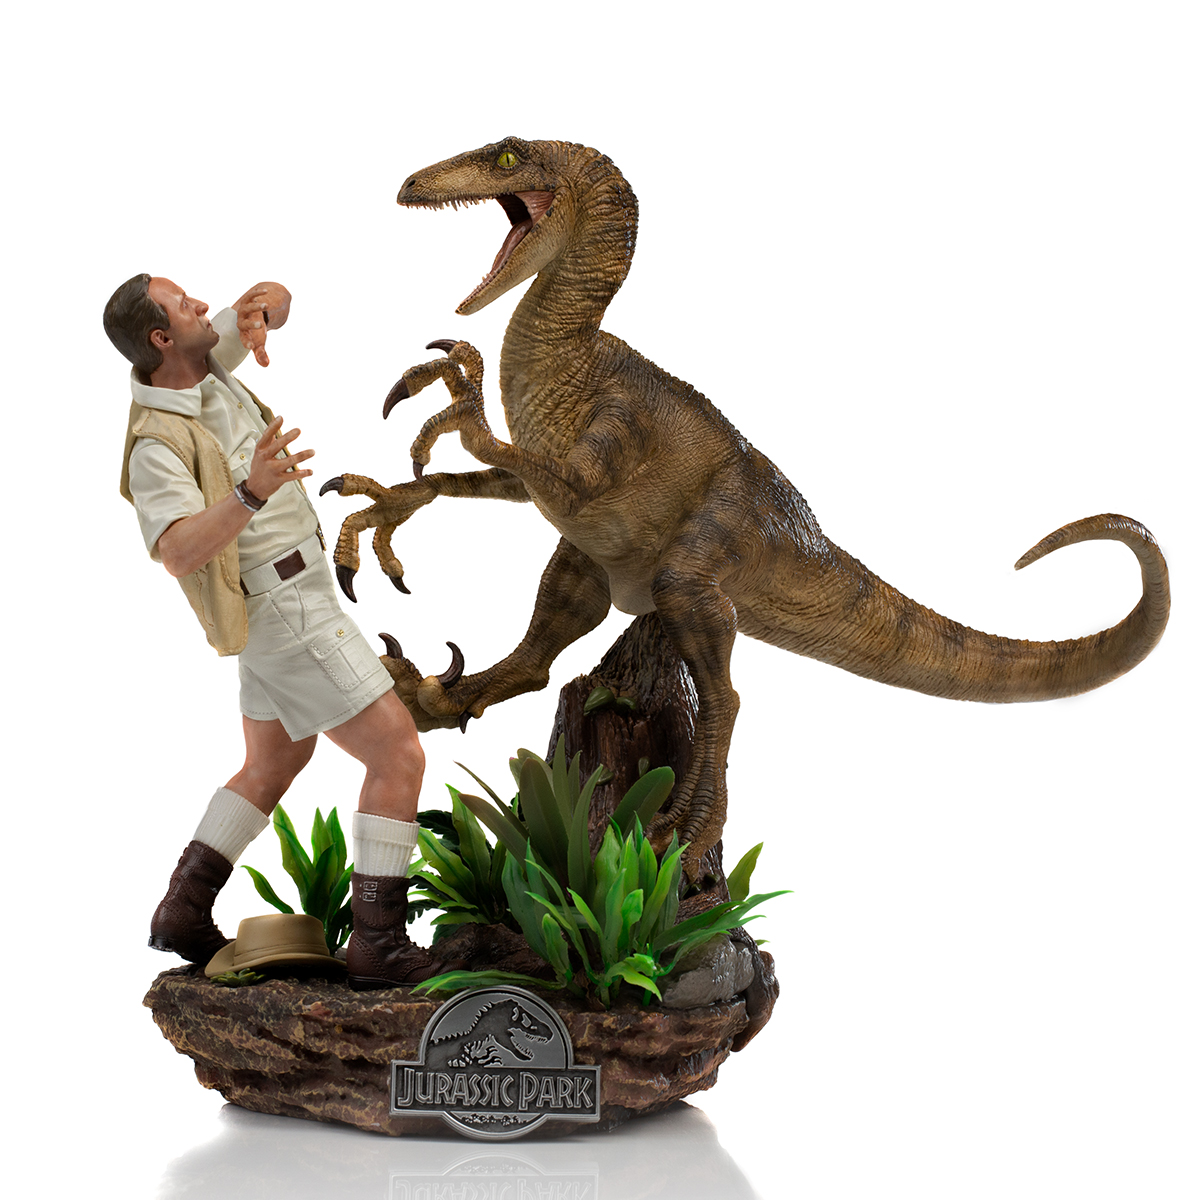 “Clever girl” scene from Jurassic Park made into a grand statue